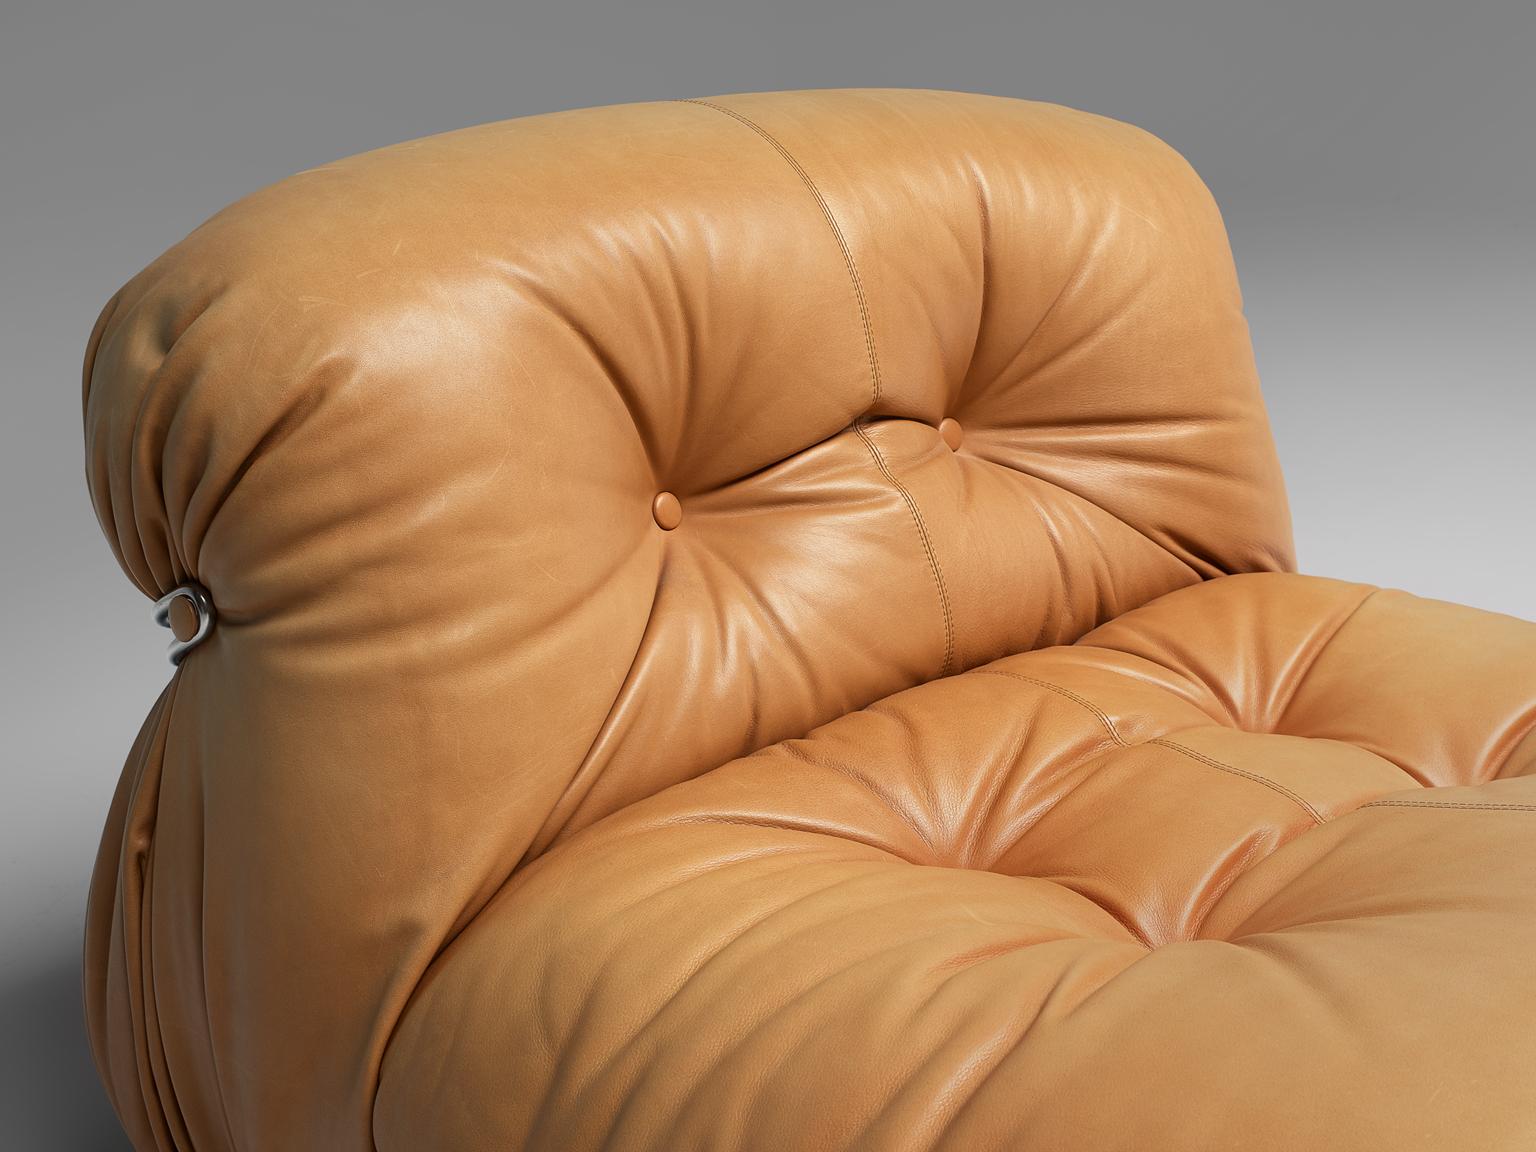 Steel Tobia Scarpa for Cassina 'Soriana' Chaise Longue Chair in Cognac Leather